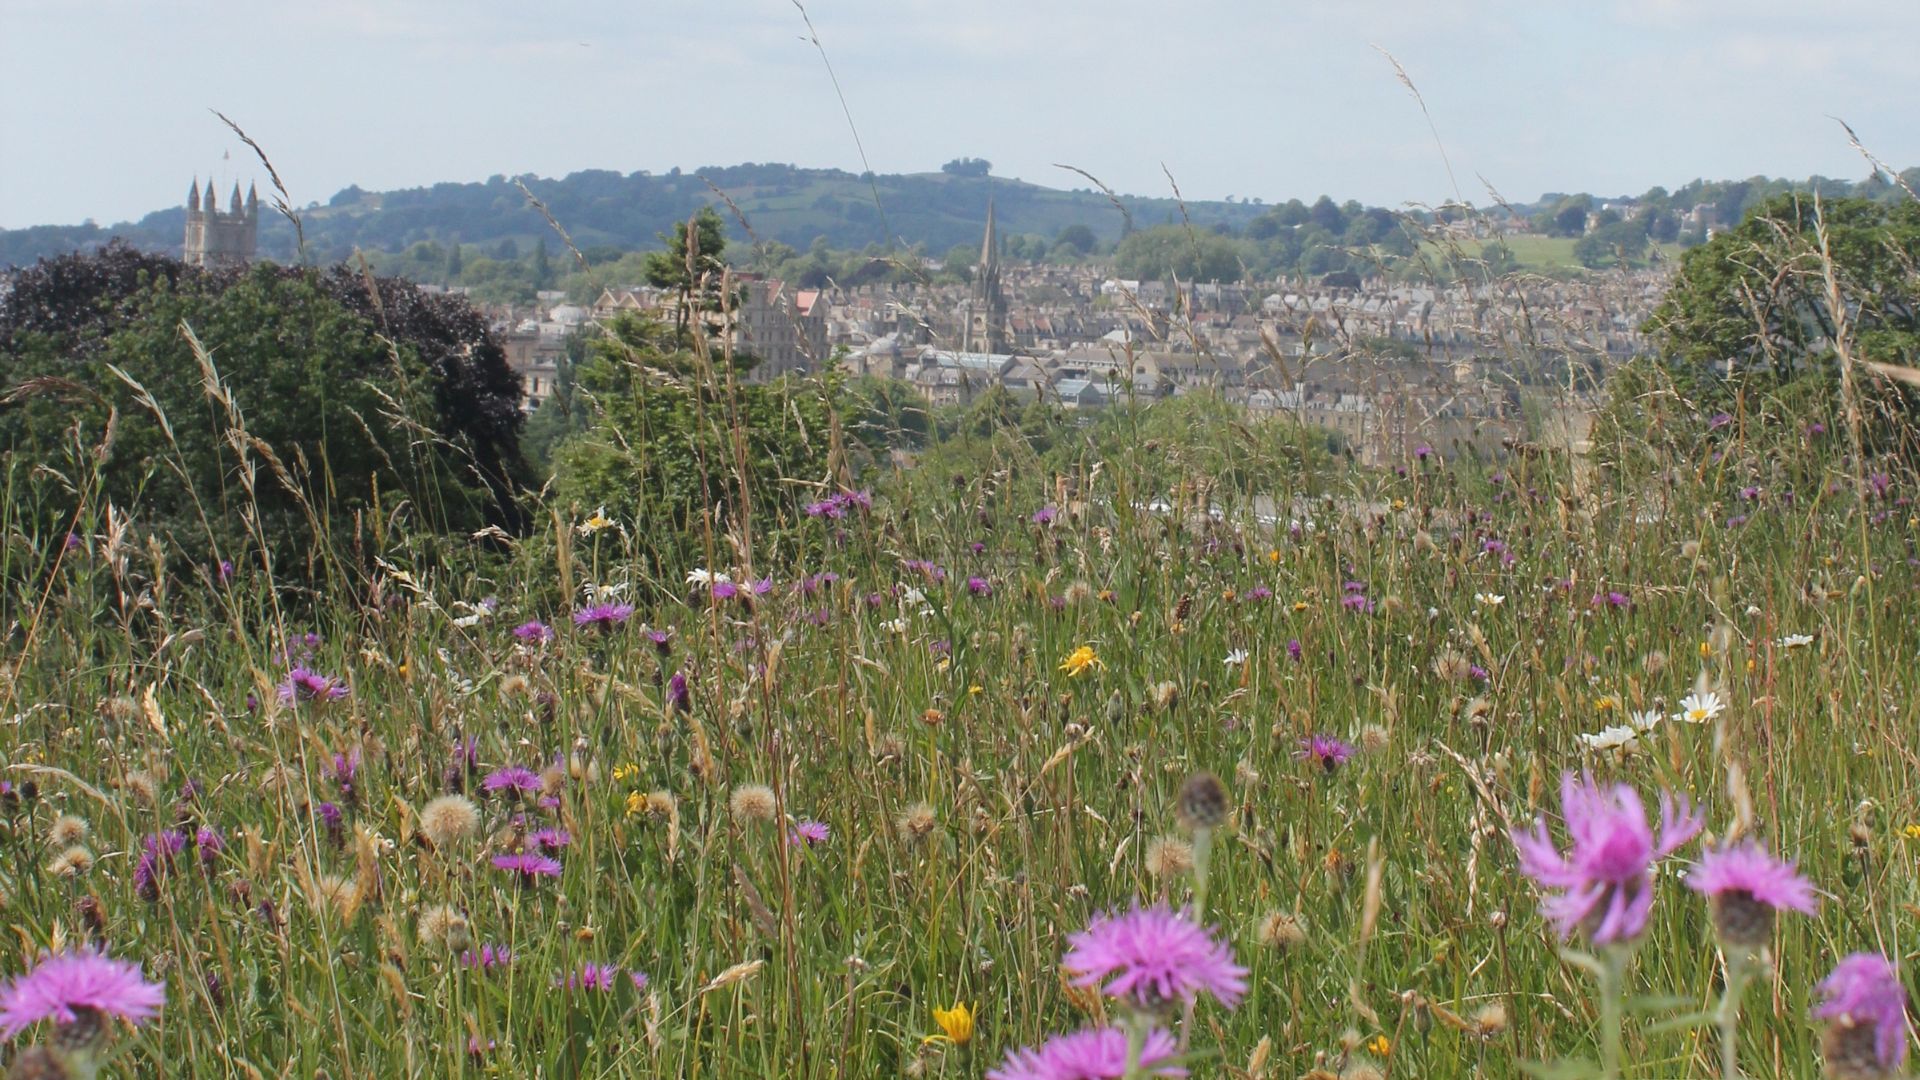 photograph of the Bath skyline and a field of flowers in the foreground